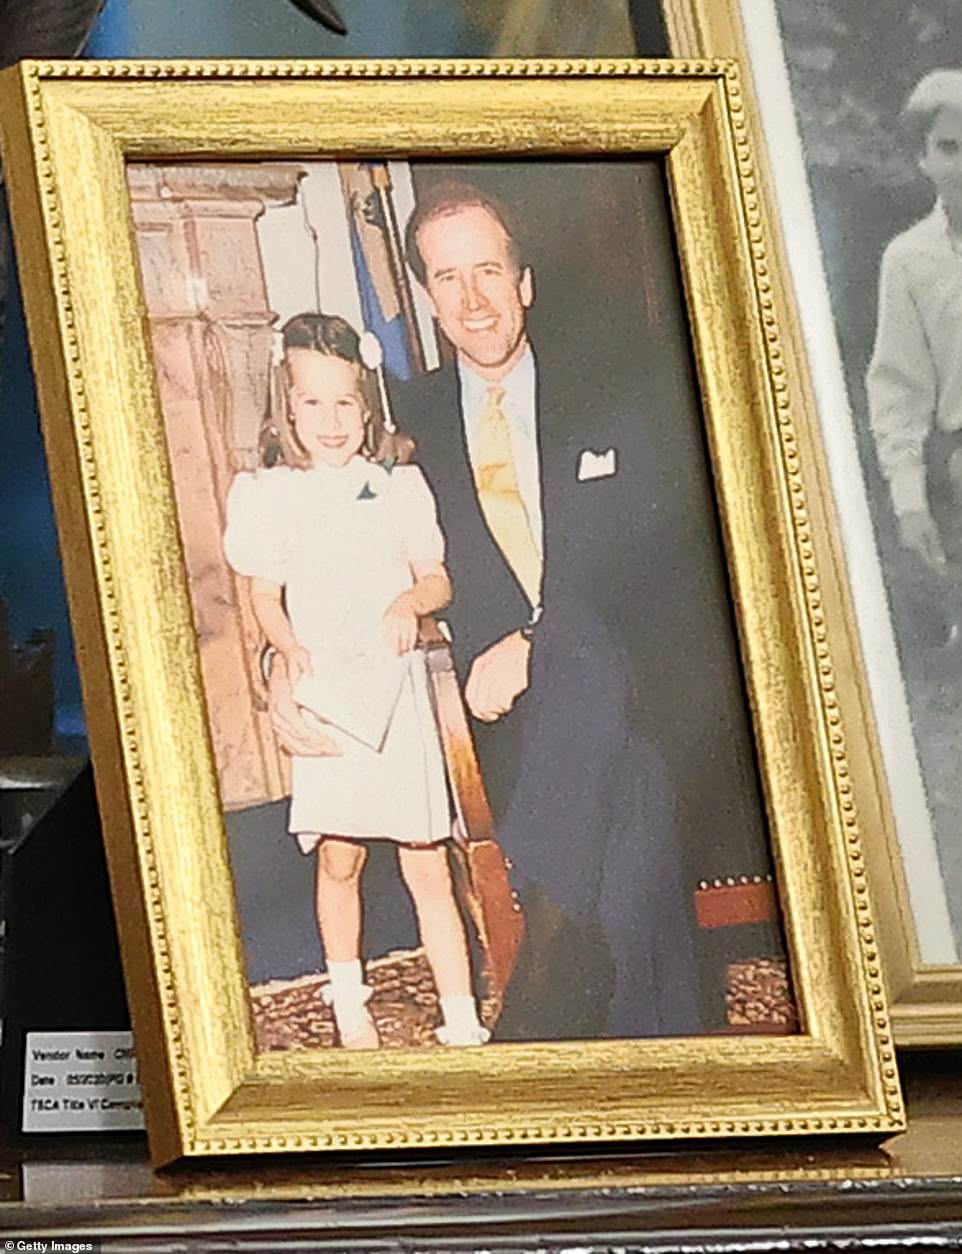 The newly elected president also has this picture with daughter Ashley on show